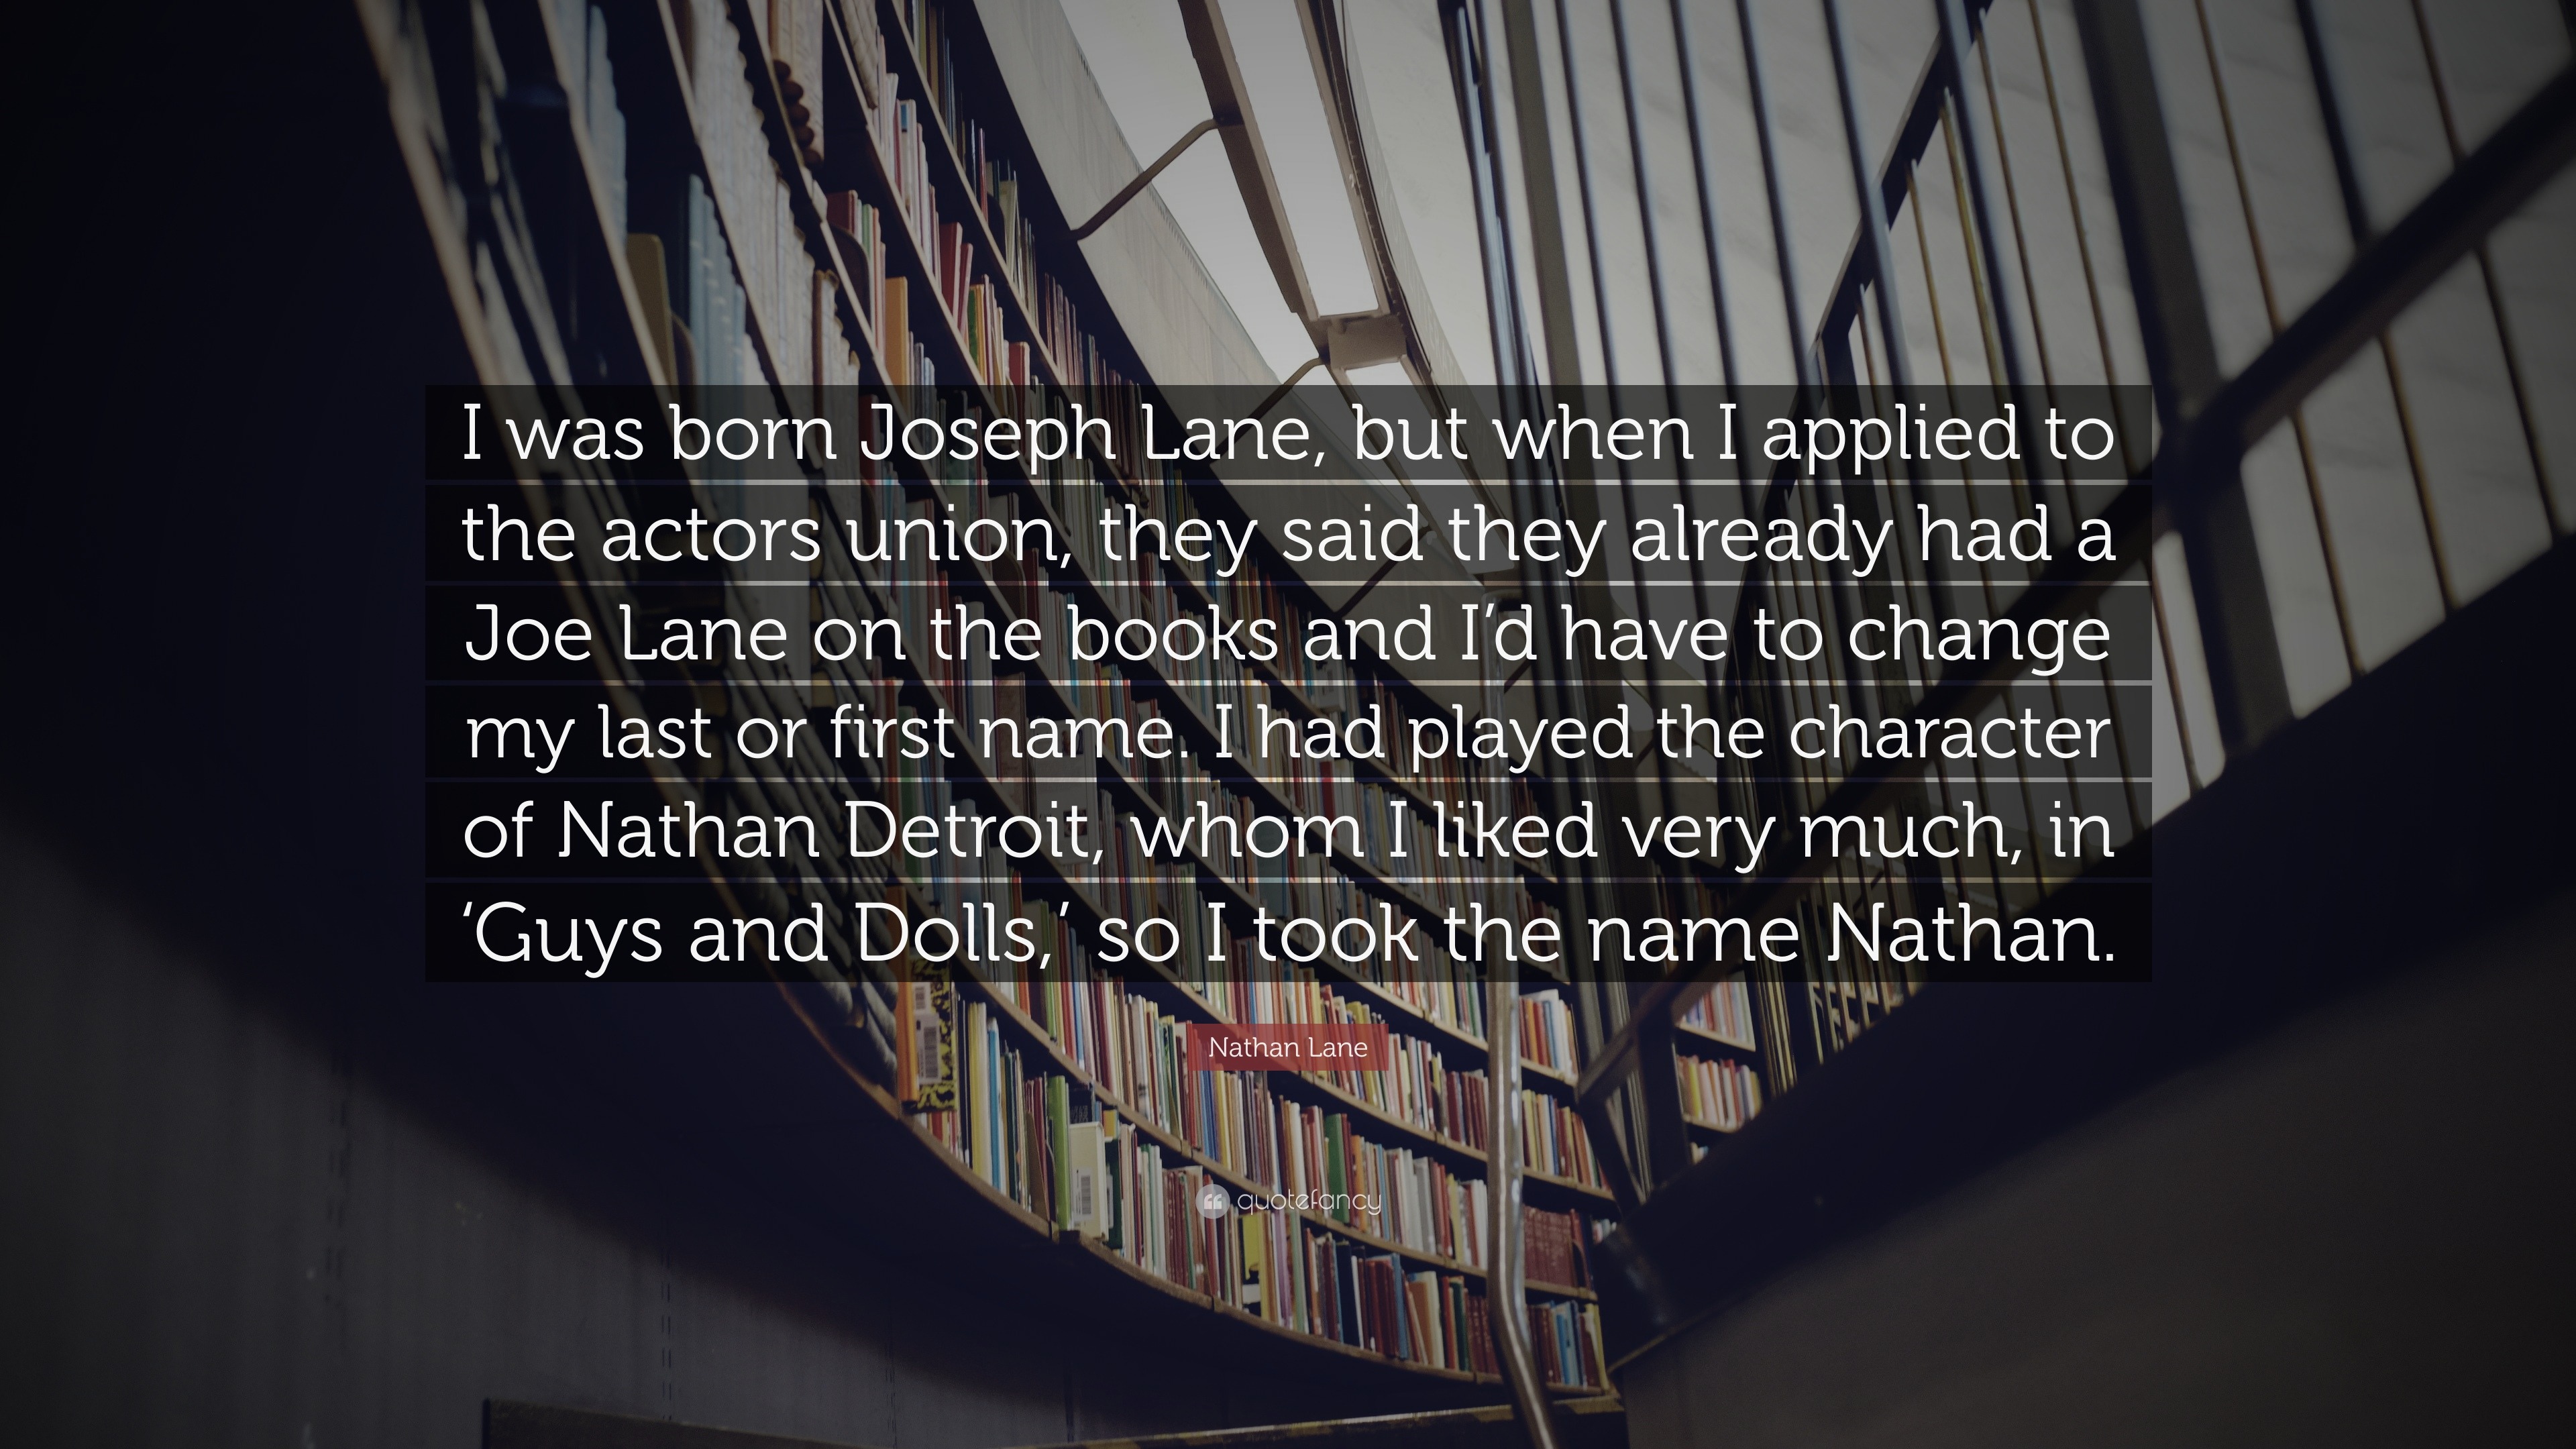 Nathan Lane Quote: “I was born Joseph Lane, but when I applied to the  actors union, they said they already had a Joe Lane on the books and I...”